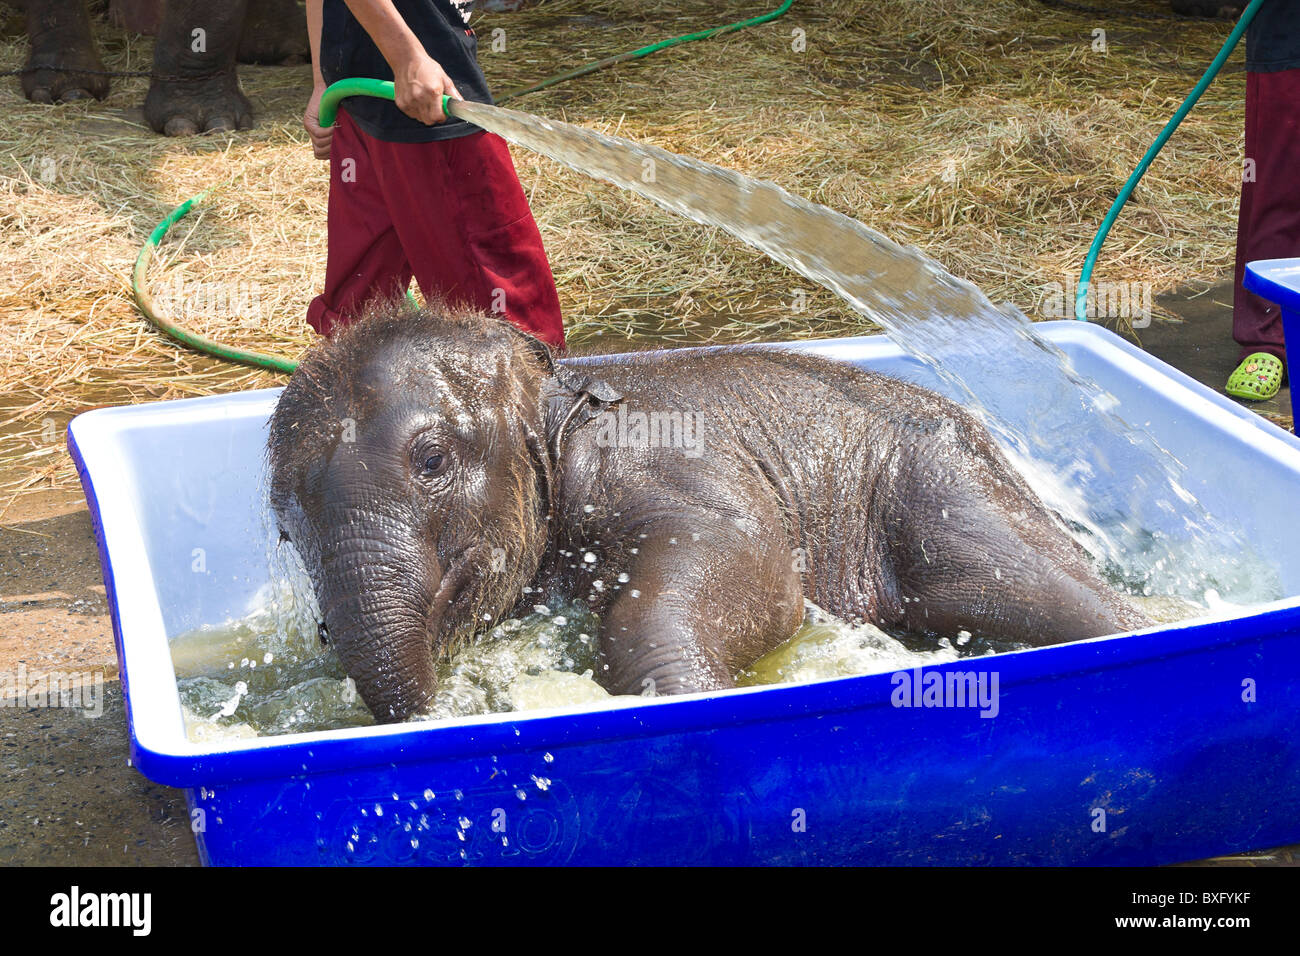 Baby elephants (five months old) play in plastic bin filled with water at Elephant Stay, elephant conservation center, Thailand Stock Photo